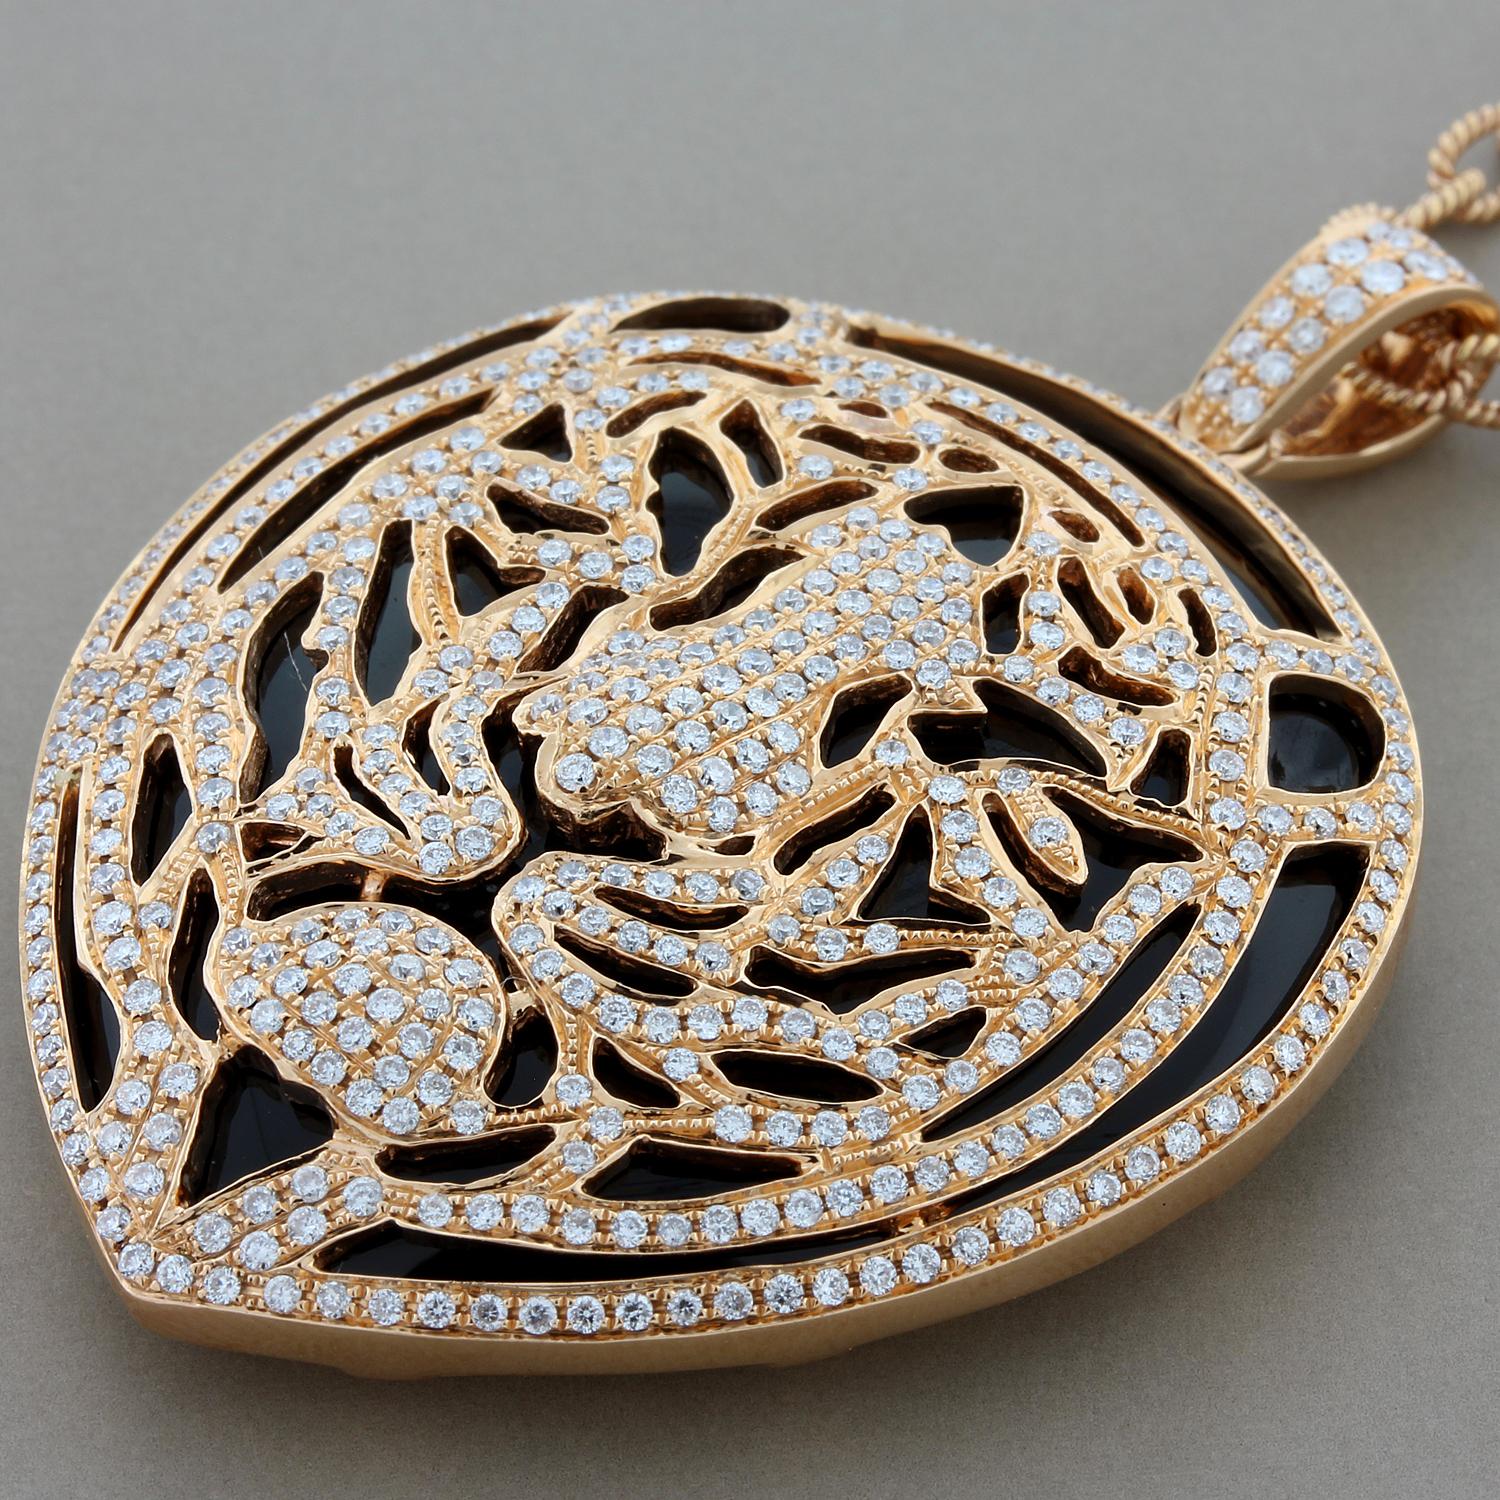 A majestic tiger in an 18K rose gold setting with 1.86 carats of colorless diamonds pave set over a smooth black onyx.
 
Chain Length: 16.00 inches
Pendant Length: 2.00 inches
Pendant Width: 1.30 inches
